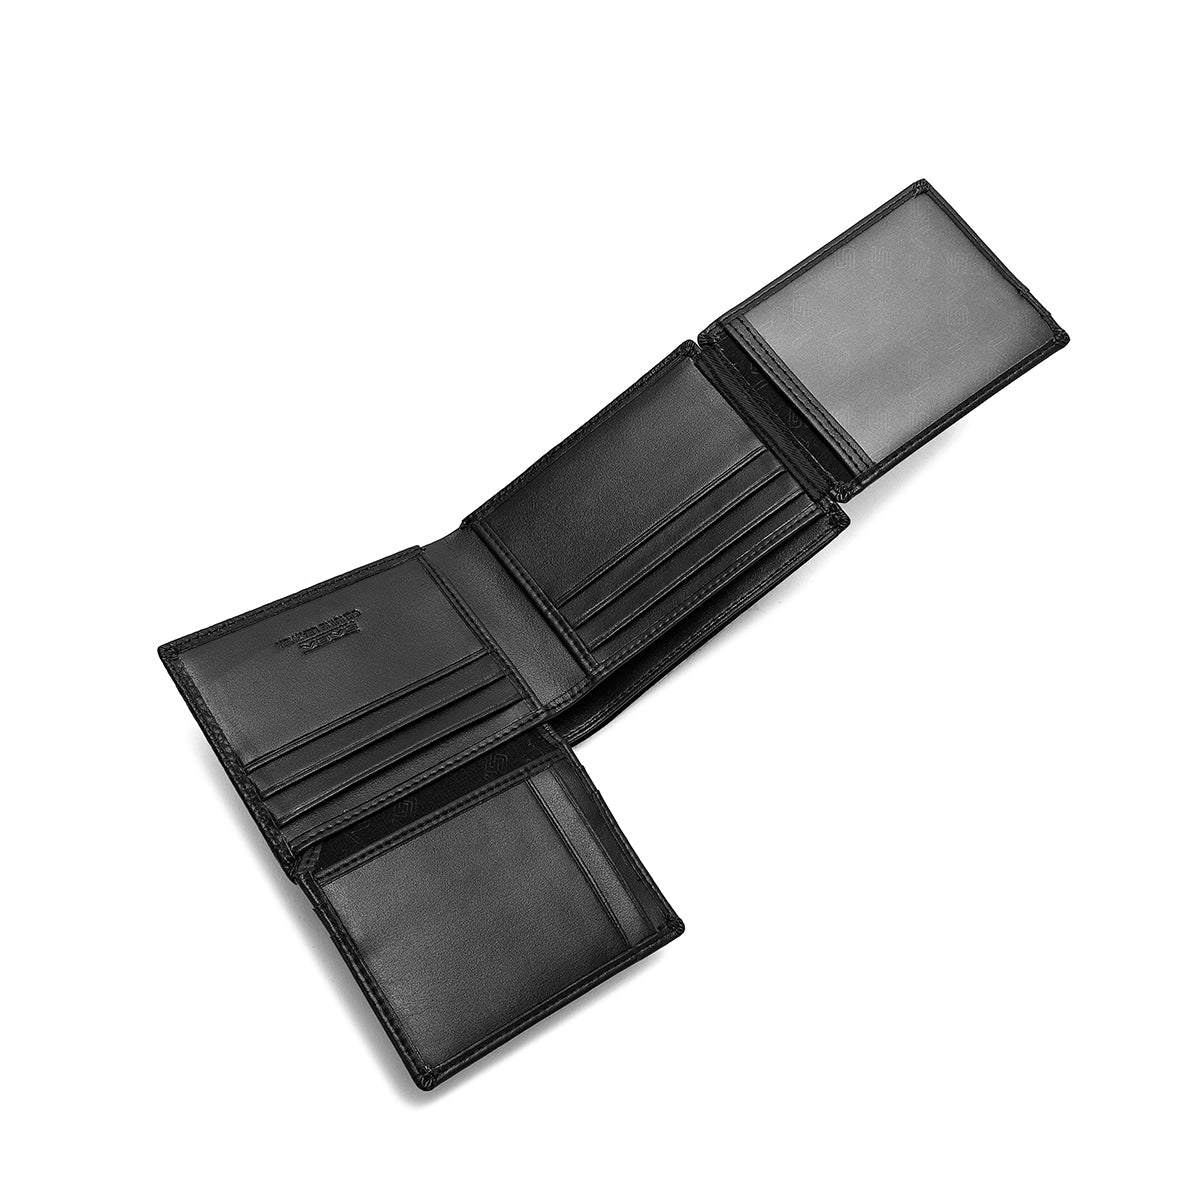 A practical men's wallet made of real genuine leather, available in two colors